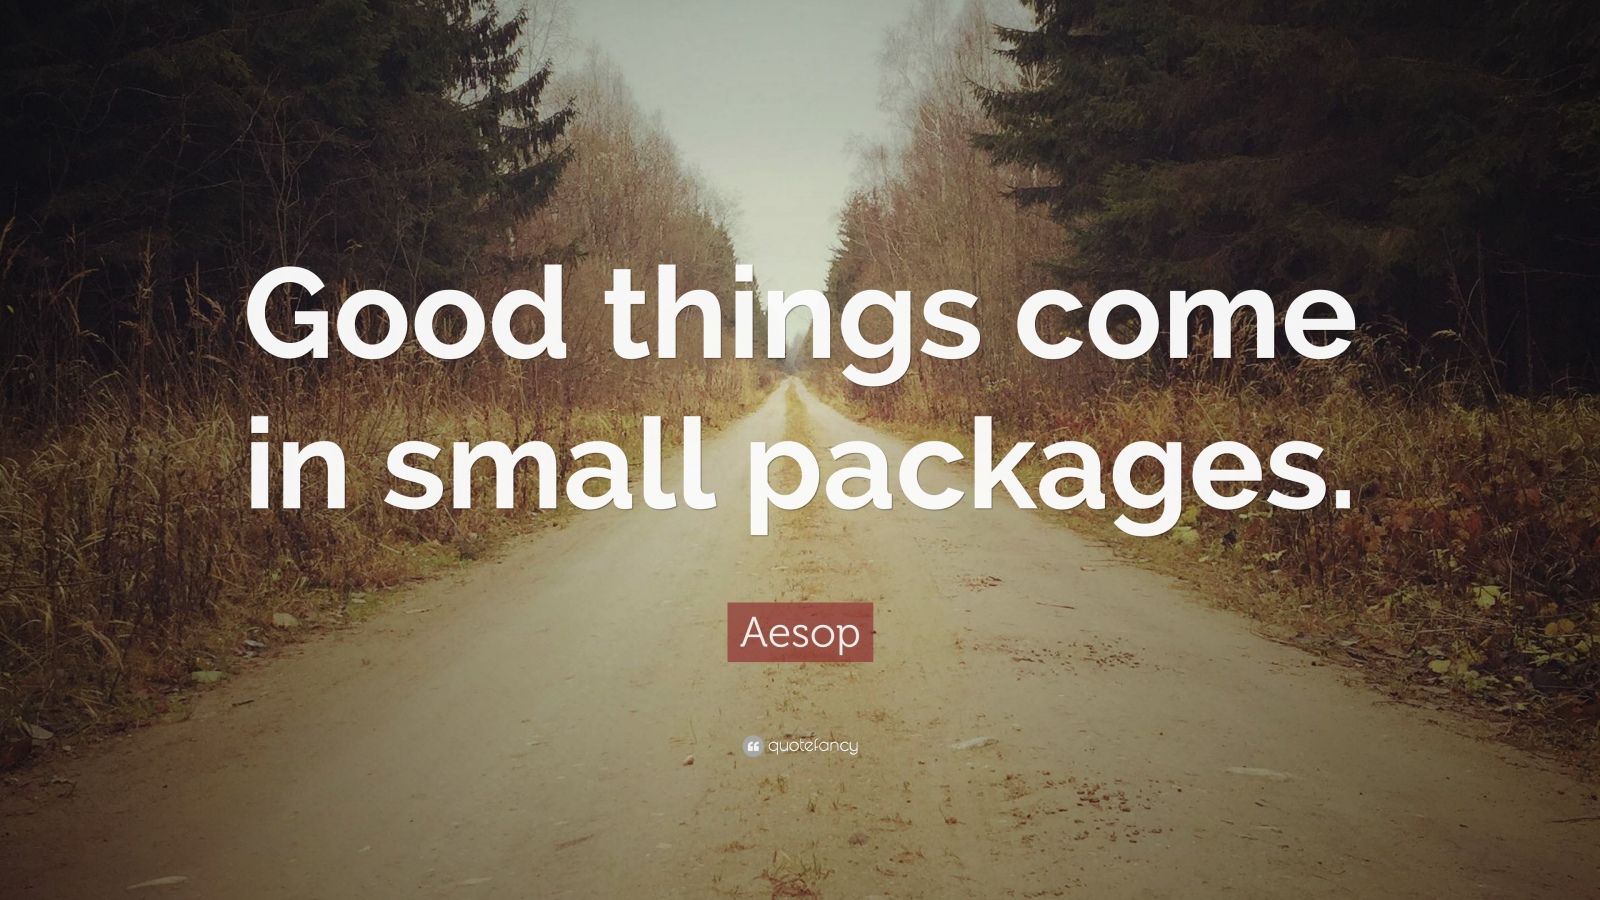 Aesop Quote: “Good things come in small packages.” (12 wallpapers